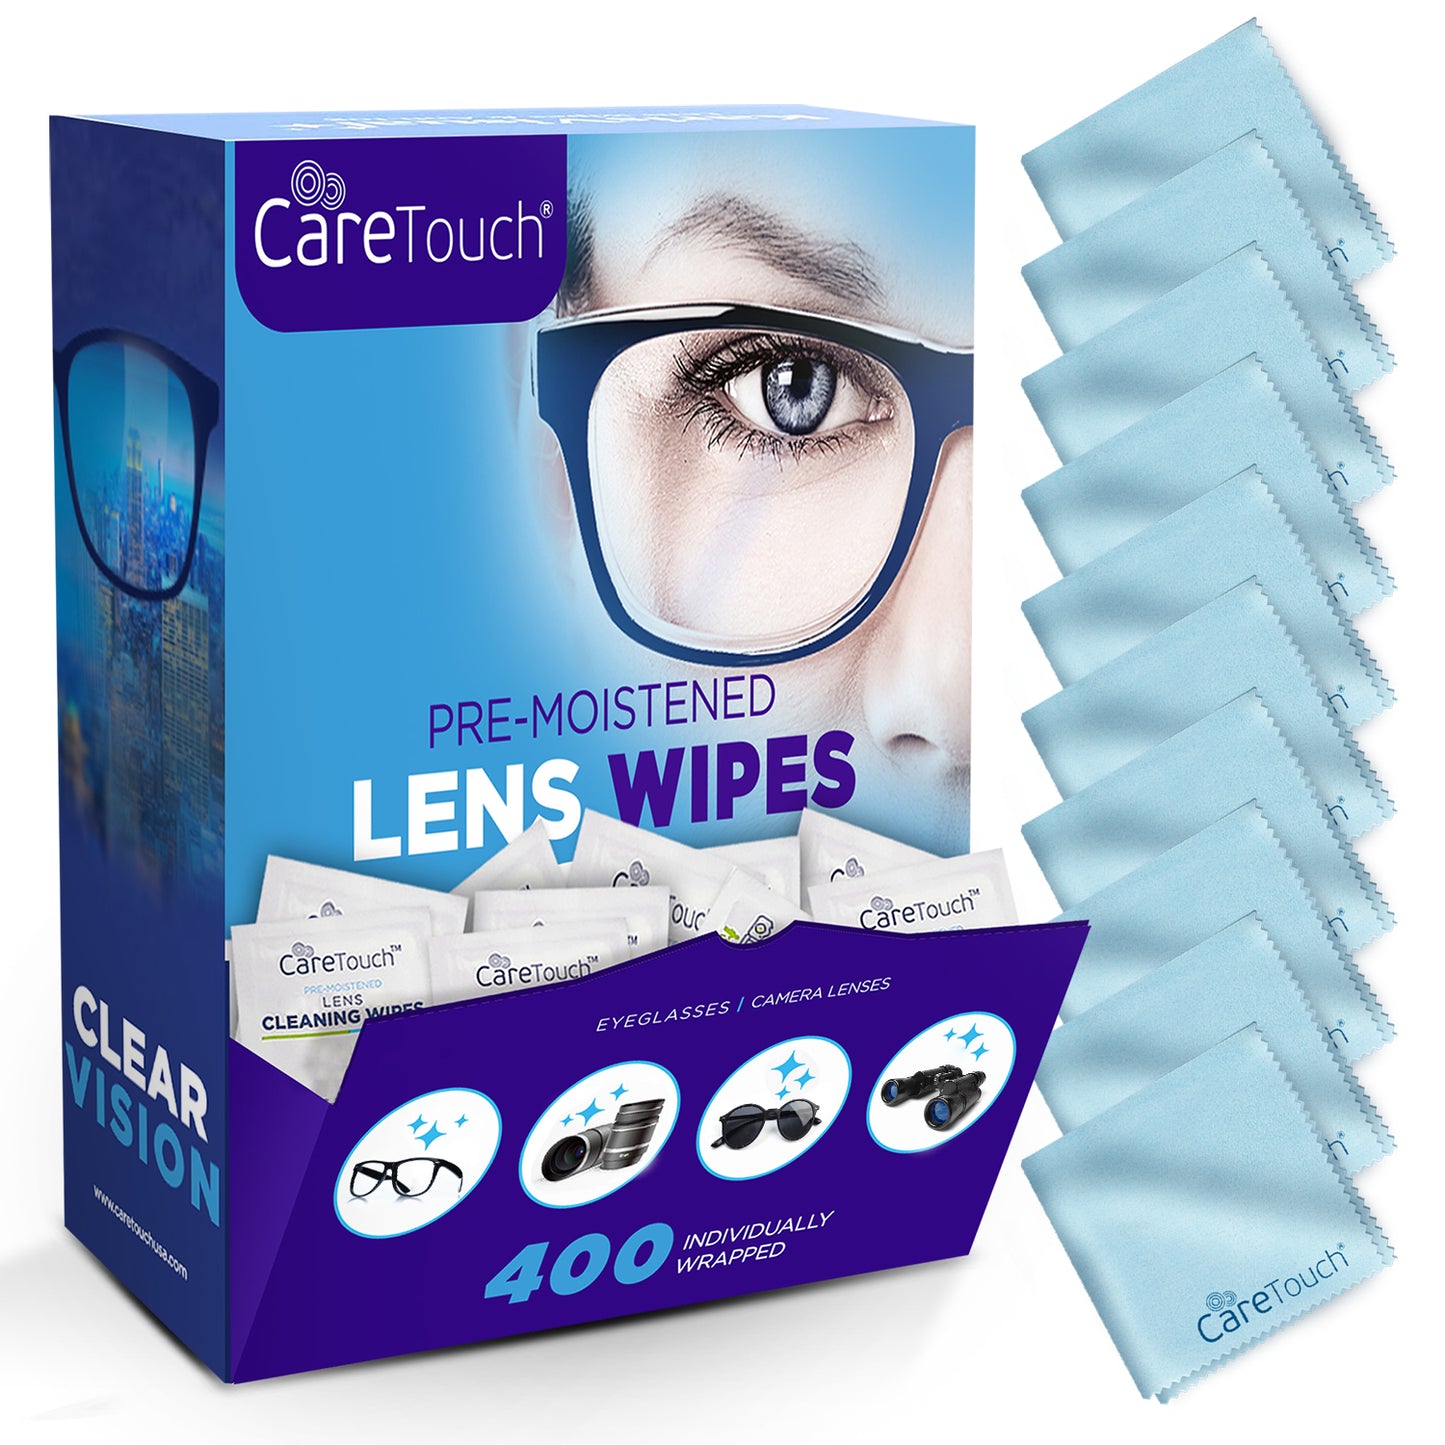 Care Touch Lens Wipes 400ct with 10 Lens Microfiber Cloths (Case of 10 units)